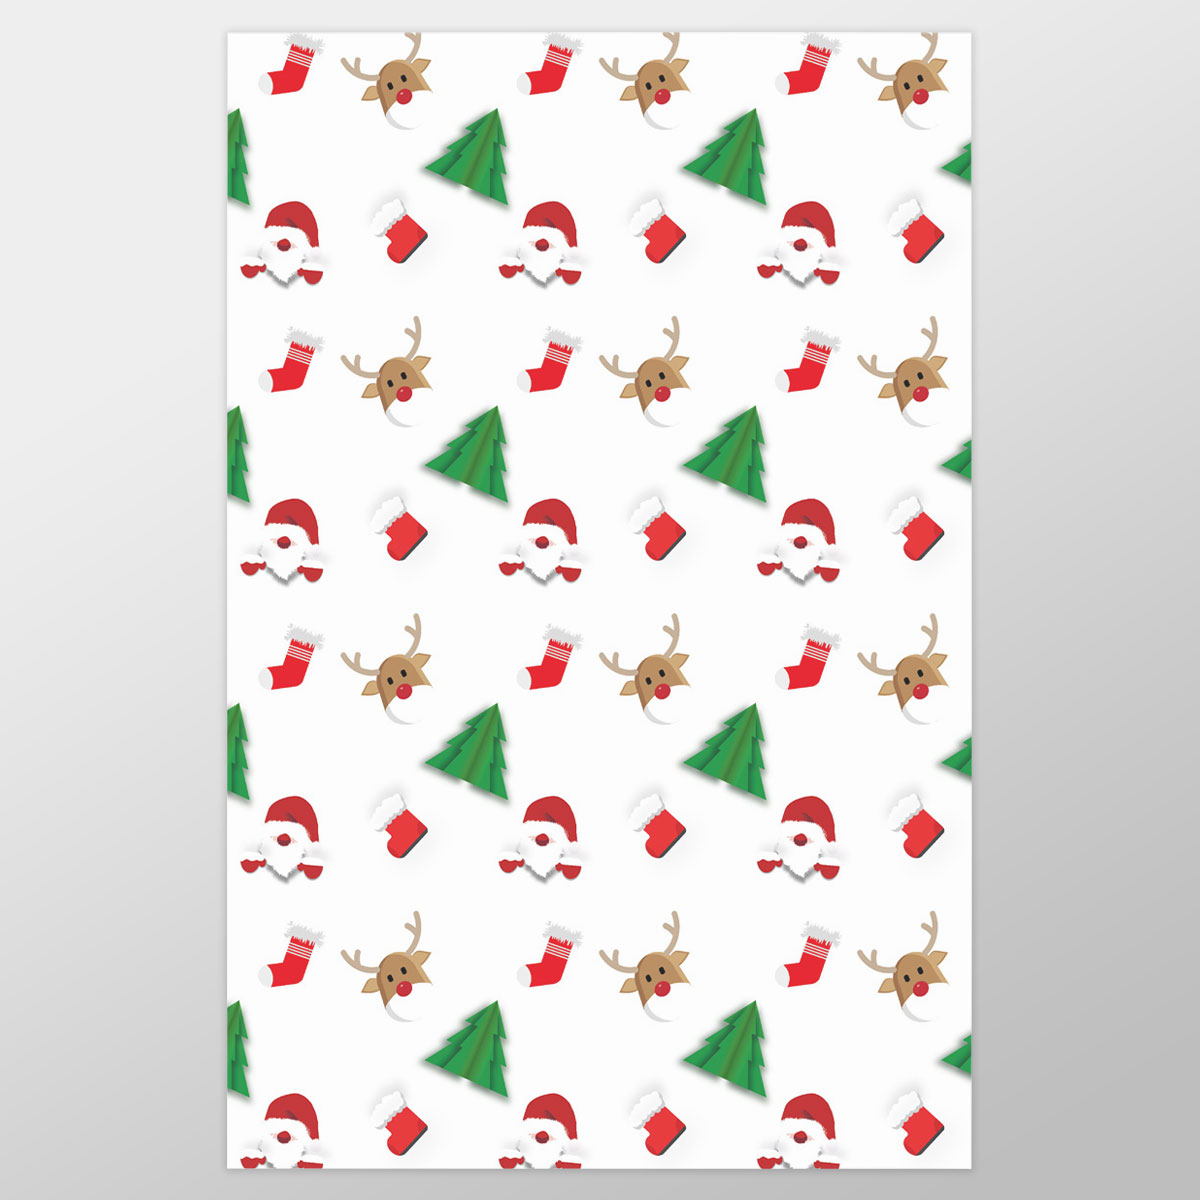 Santa Claus, Pine Tree Silhouette, Christmas Reindeer And Red Socks Seamless Pattern Wrapping Paper